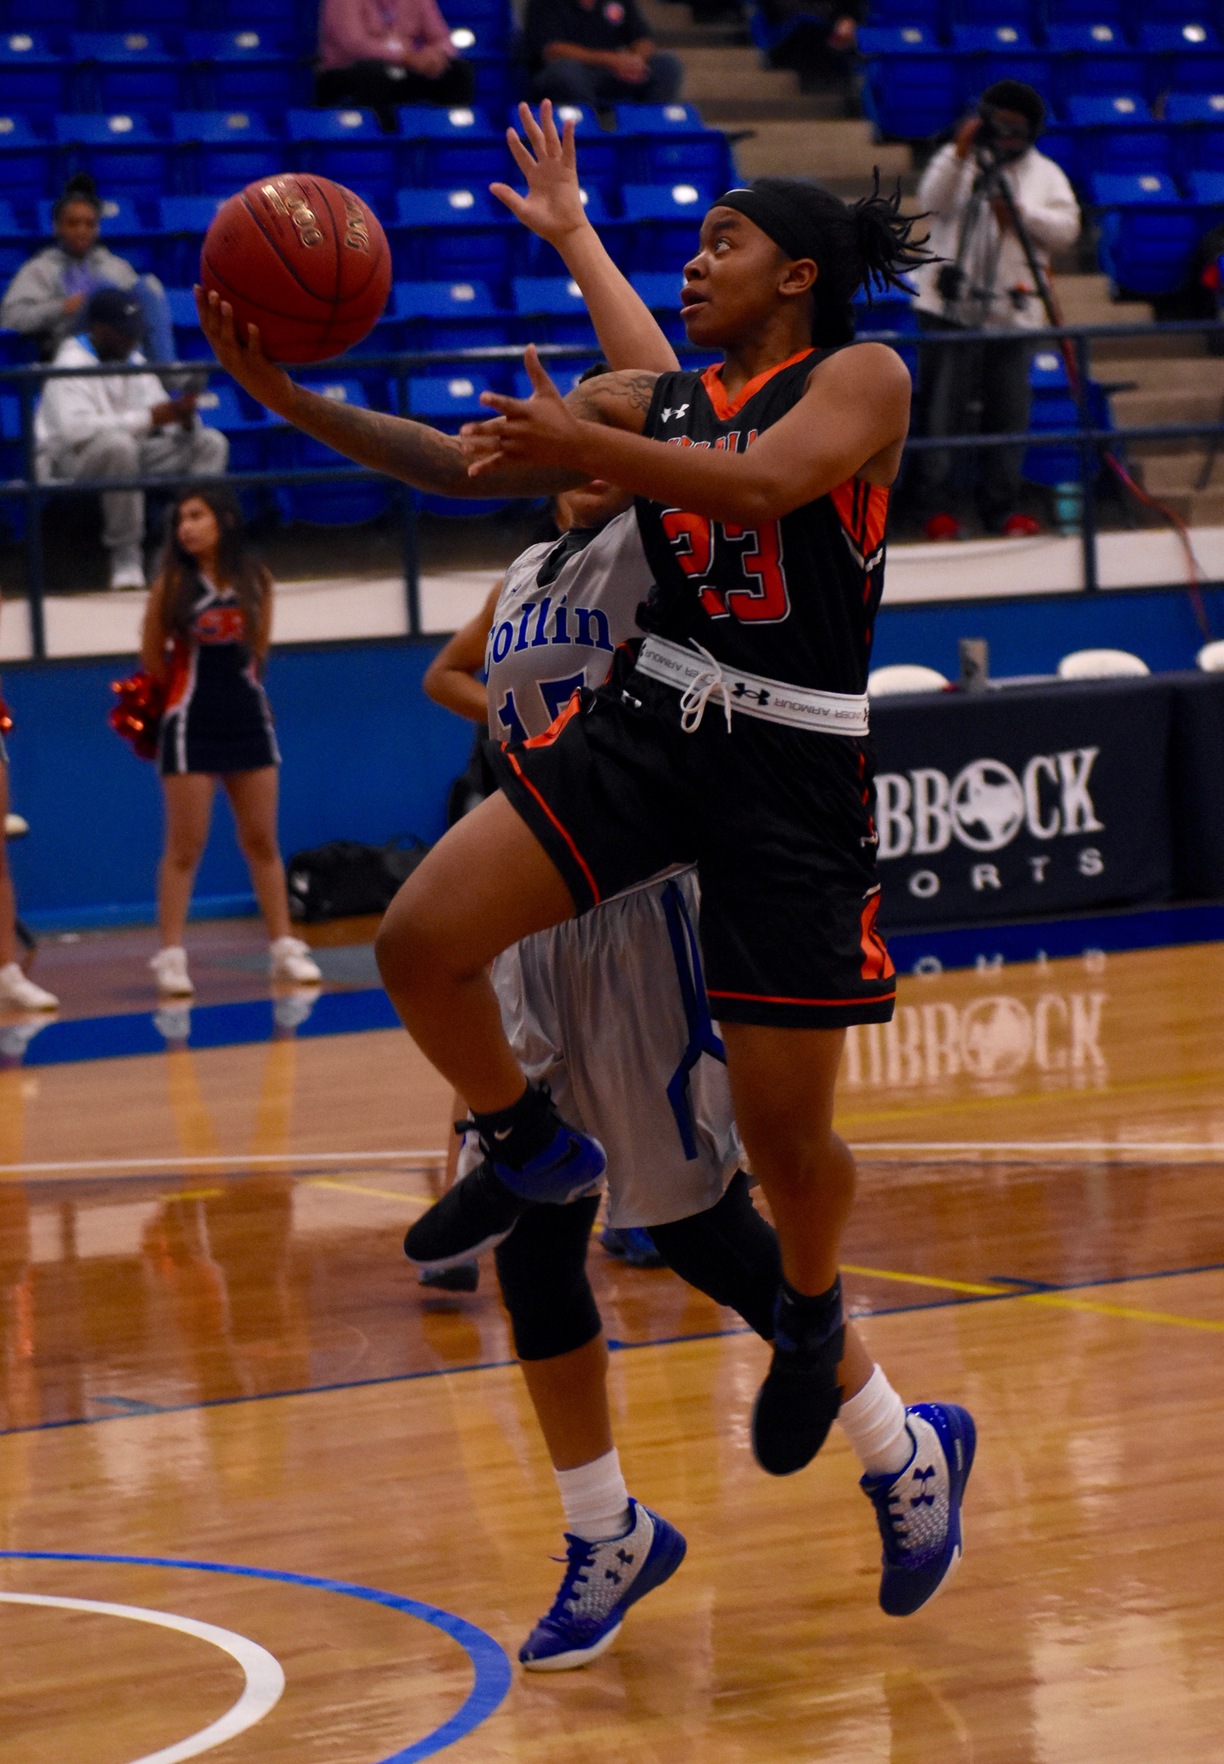 Despite valiant fourth quarter surge, Lady Texans fall to Collin County 77-70 in semifinal round of Region V Tournament